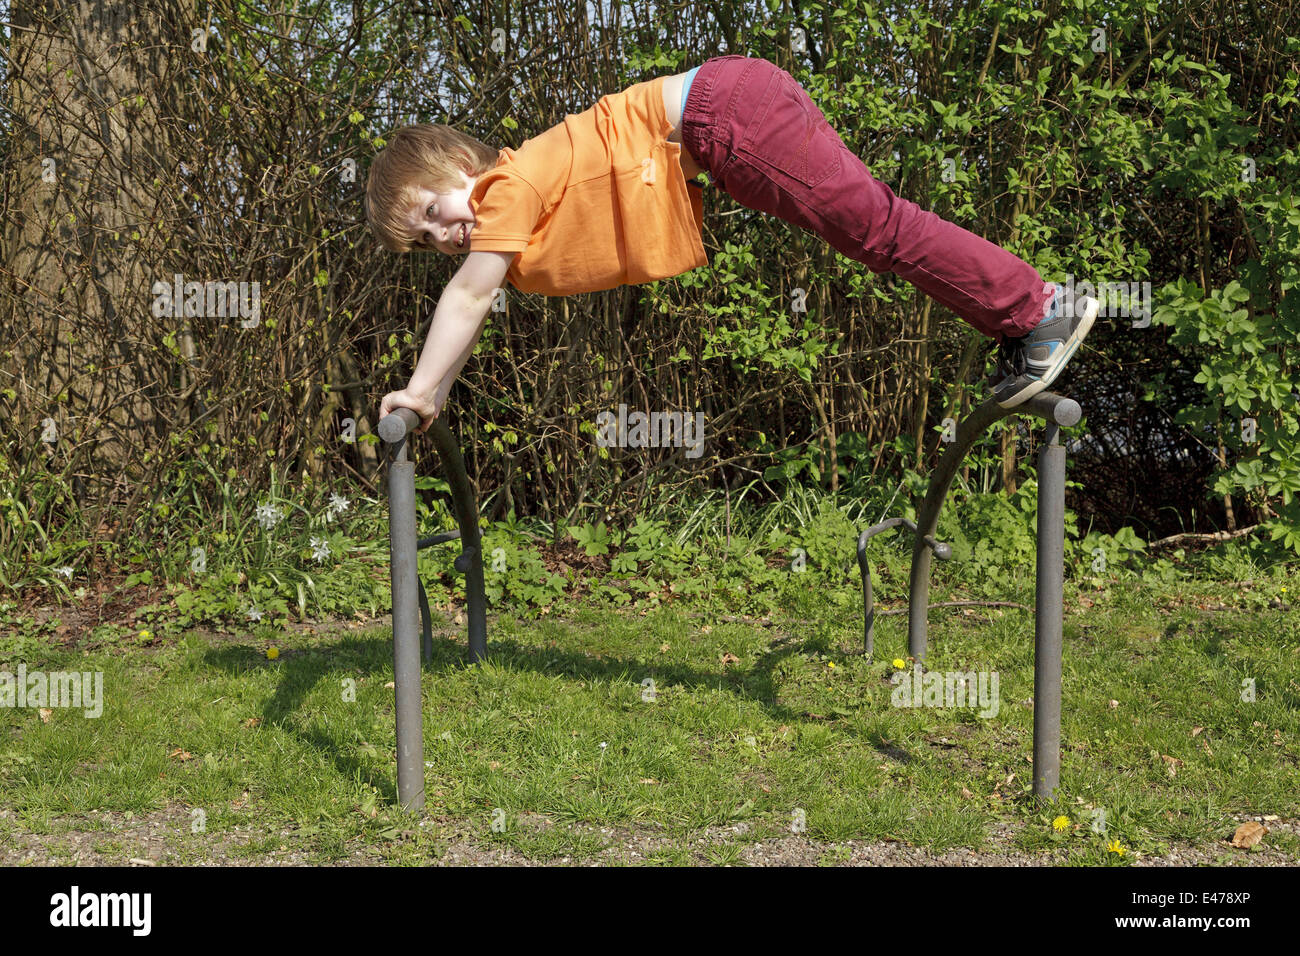 young boy climbing on a bicycle stand Stock Photo